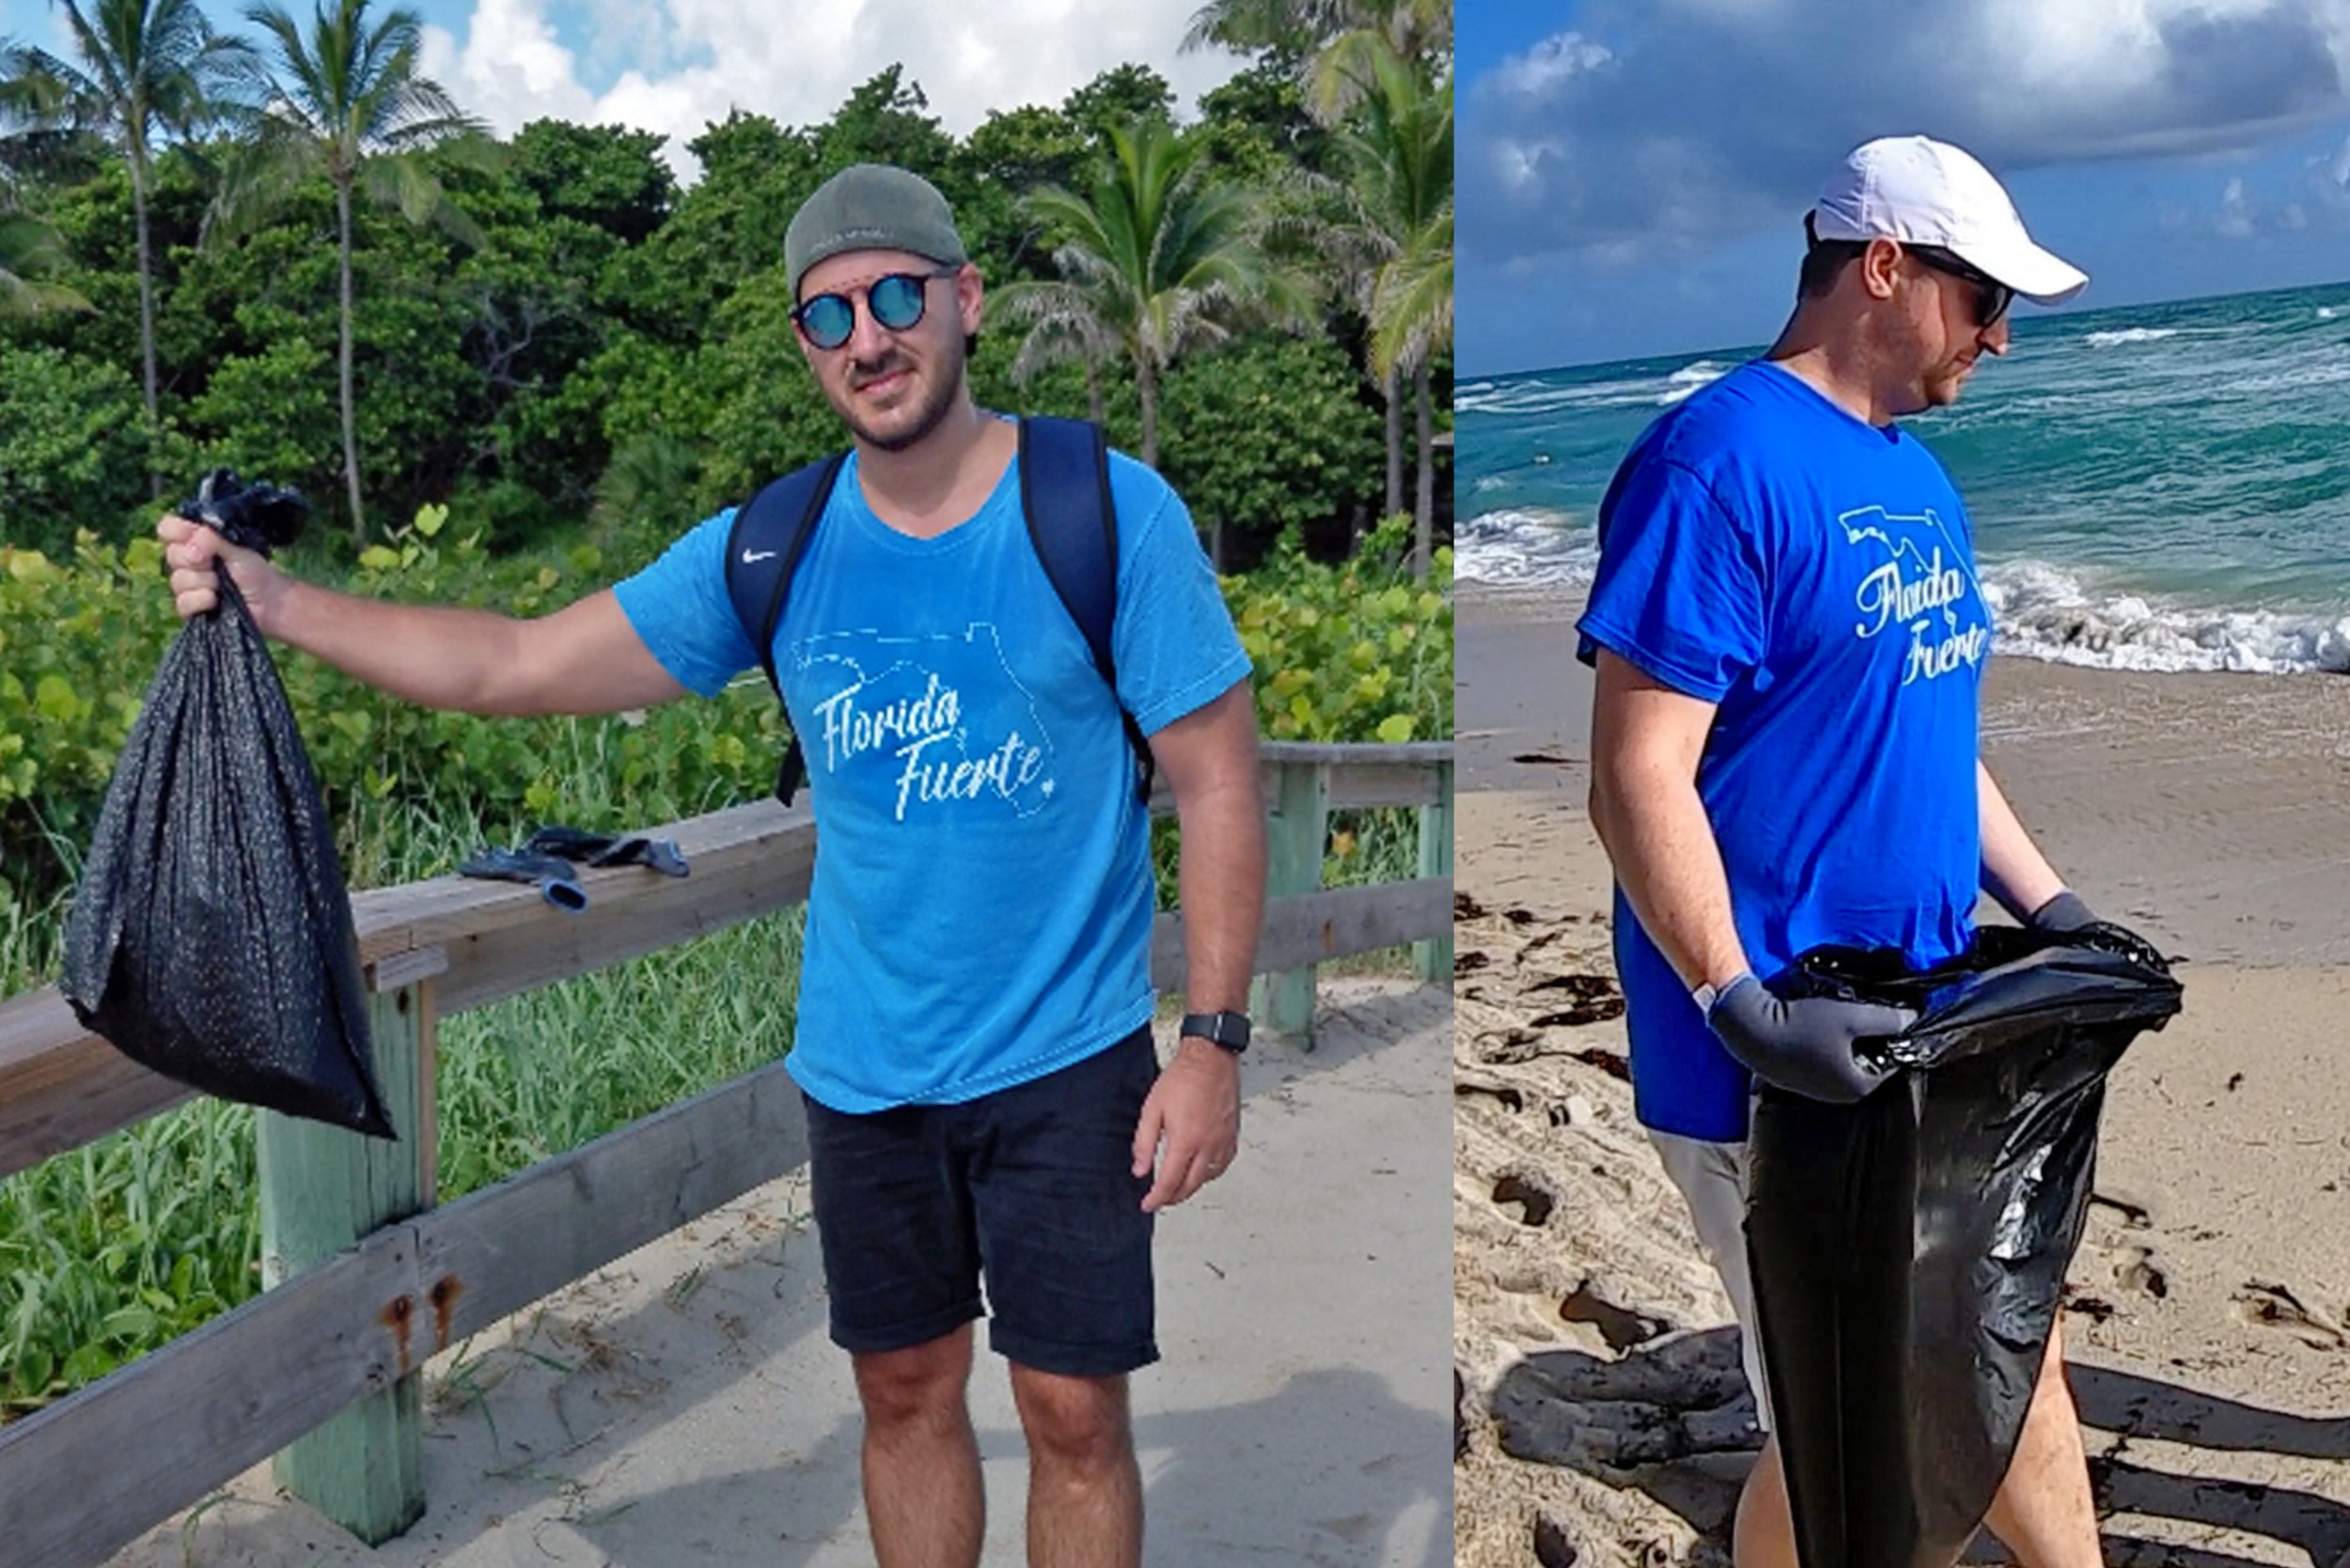 The Boat Trader crew picks up trash at Miami Beach and challenges boaters everywhere to pick up trash and tag @BoatTraderUSA and #CleanWake. It feels great to make a difference.